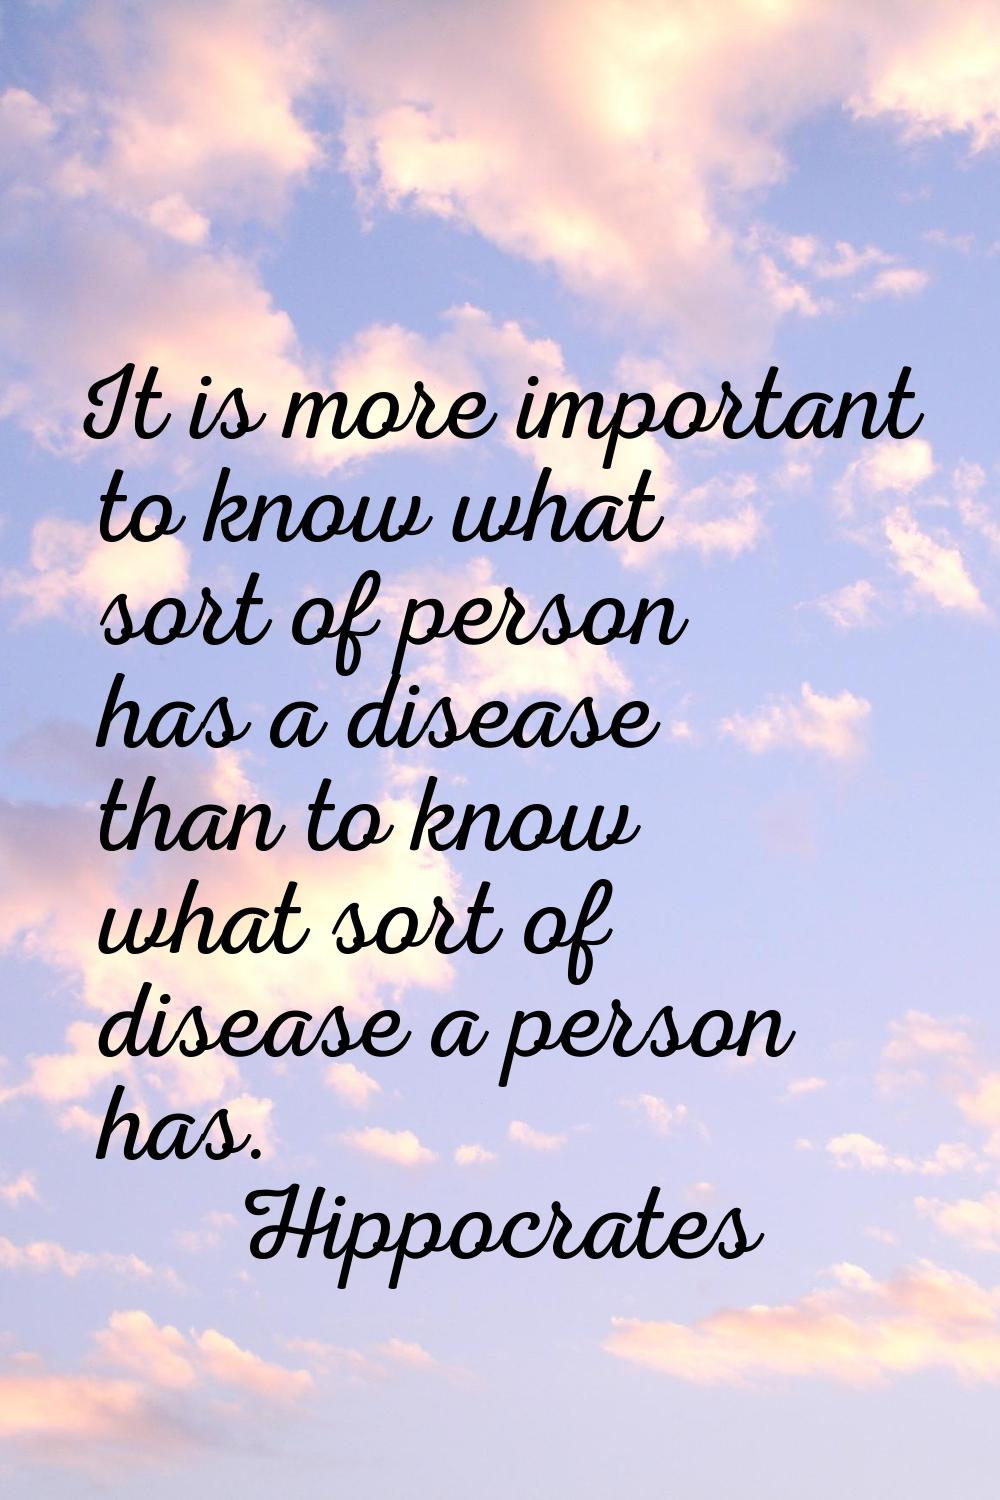 It is more important to know what sort of person has a disease than to know what sort of disease a 